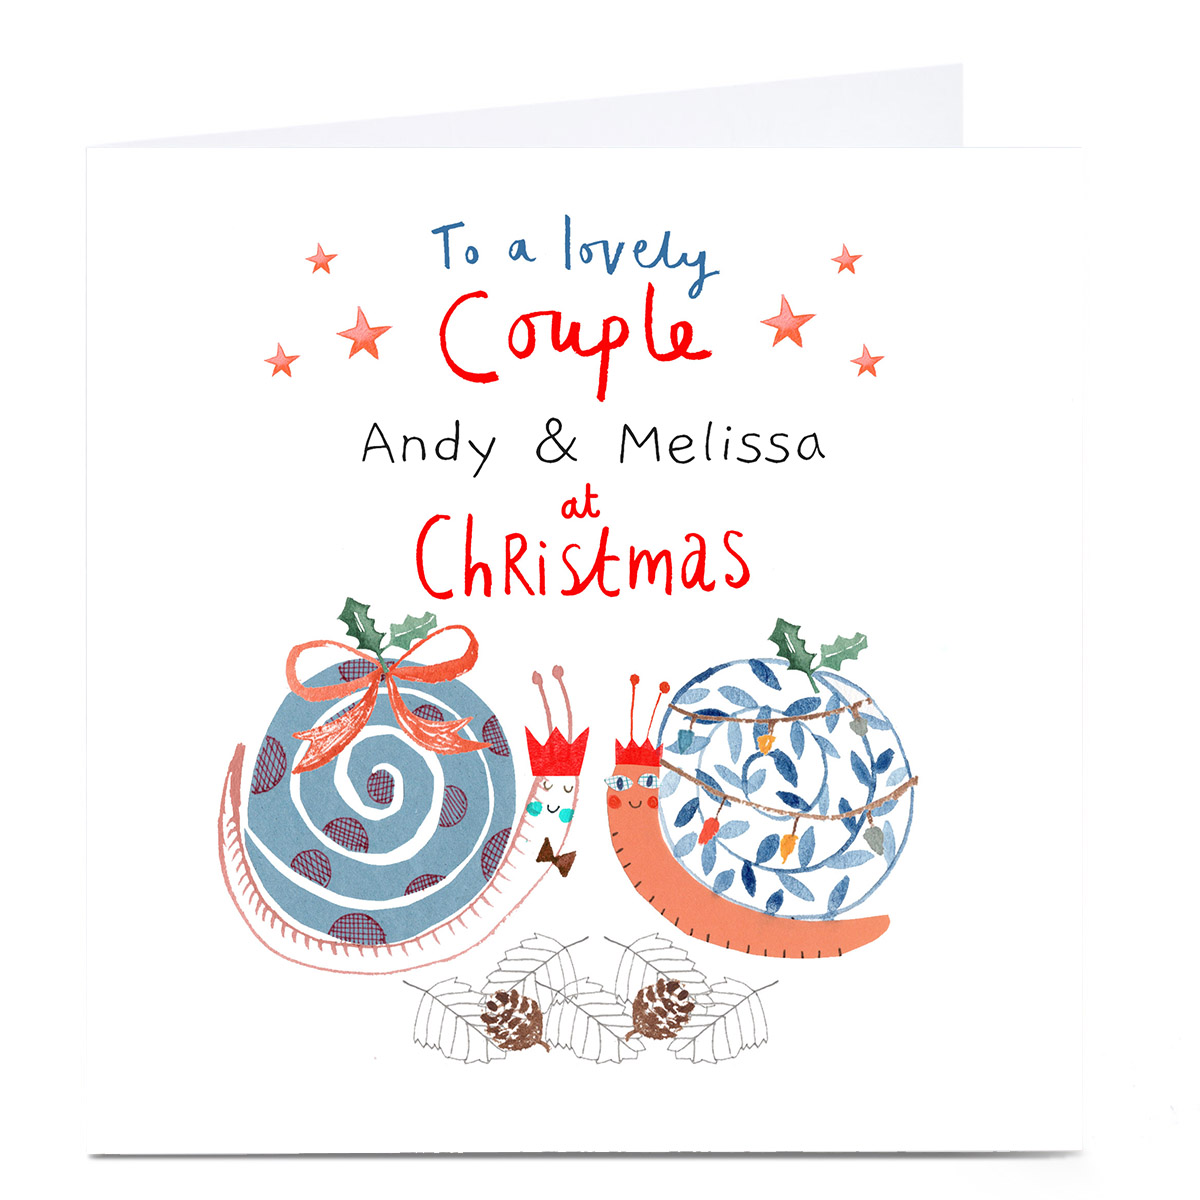 Personalised Lindsay Loves To Draw Christmas Card - Lovely Couple